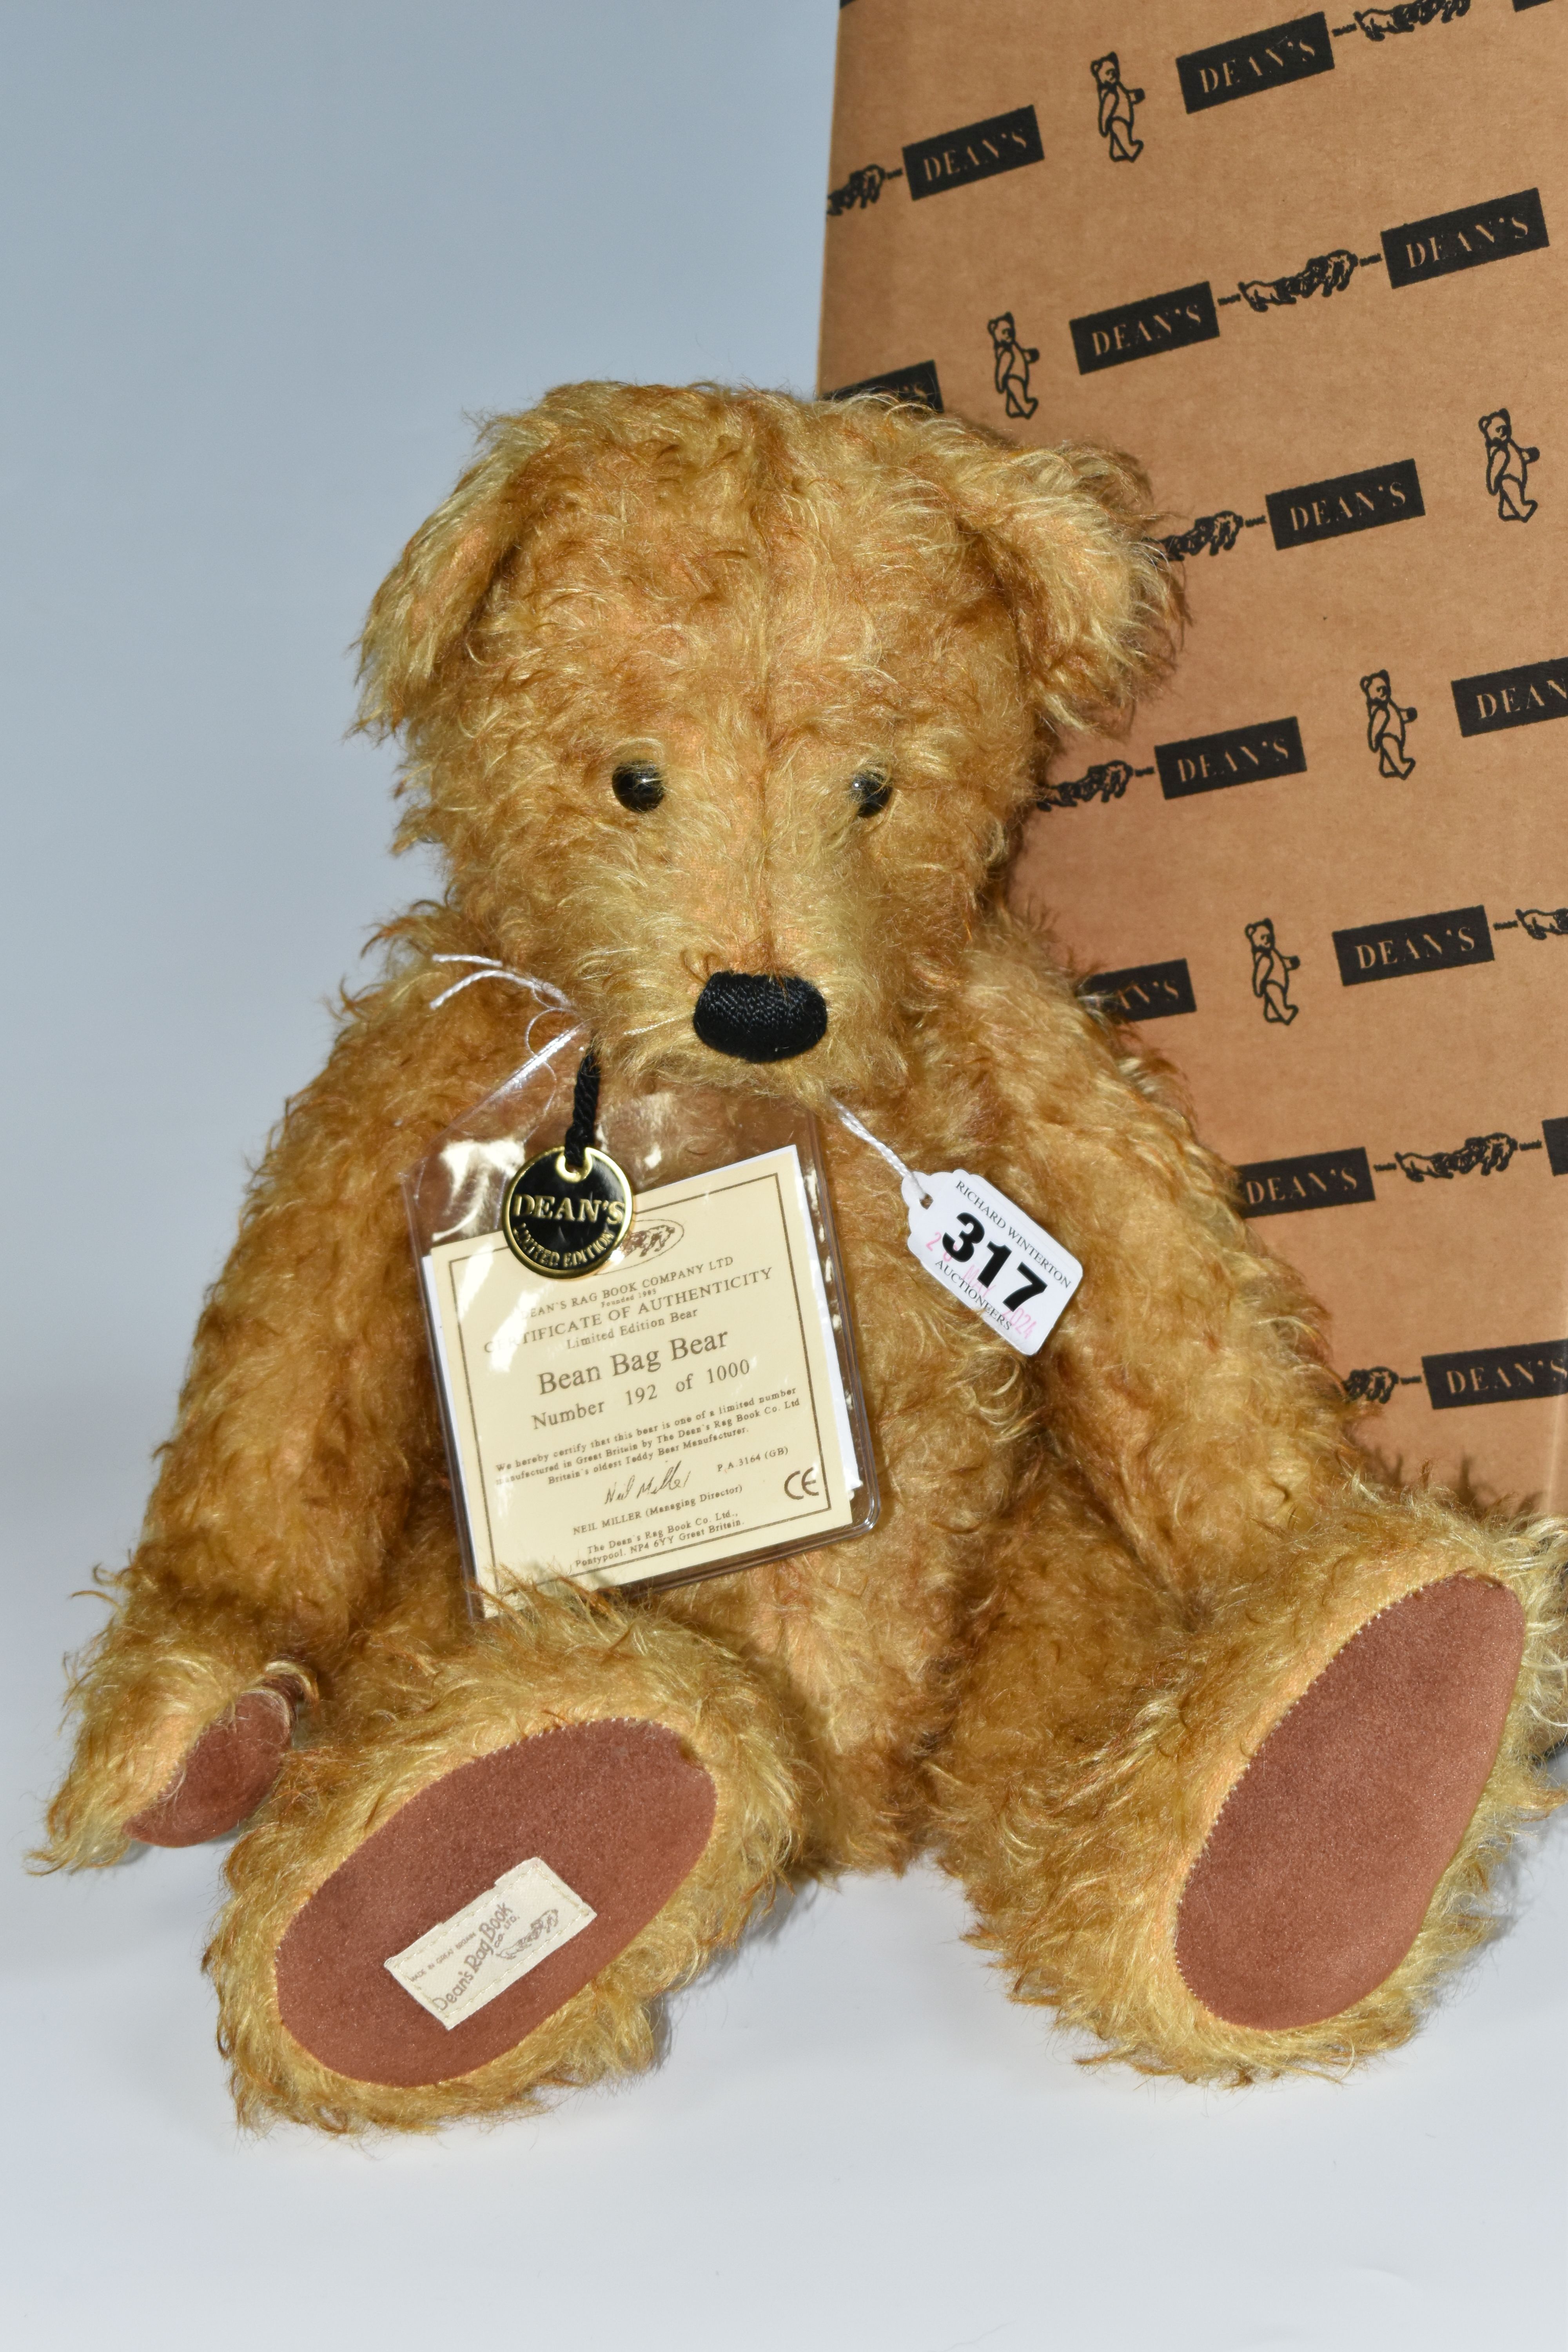 A BOXED LIMITED EDITION DEAN'S RAG BOOK TEDDY BEAR, 'Bean Bag Bear' with attached certificate